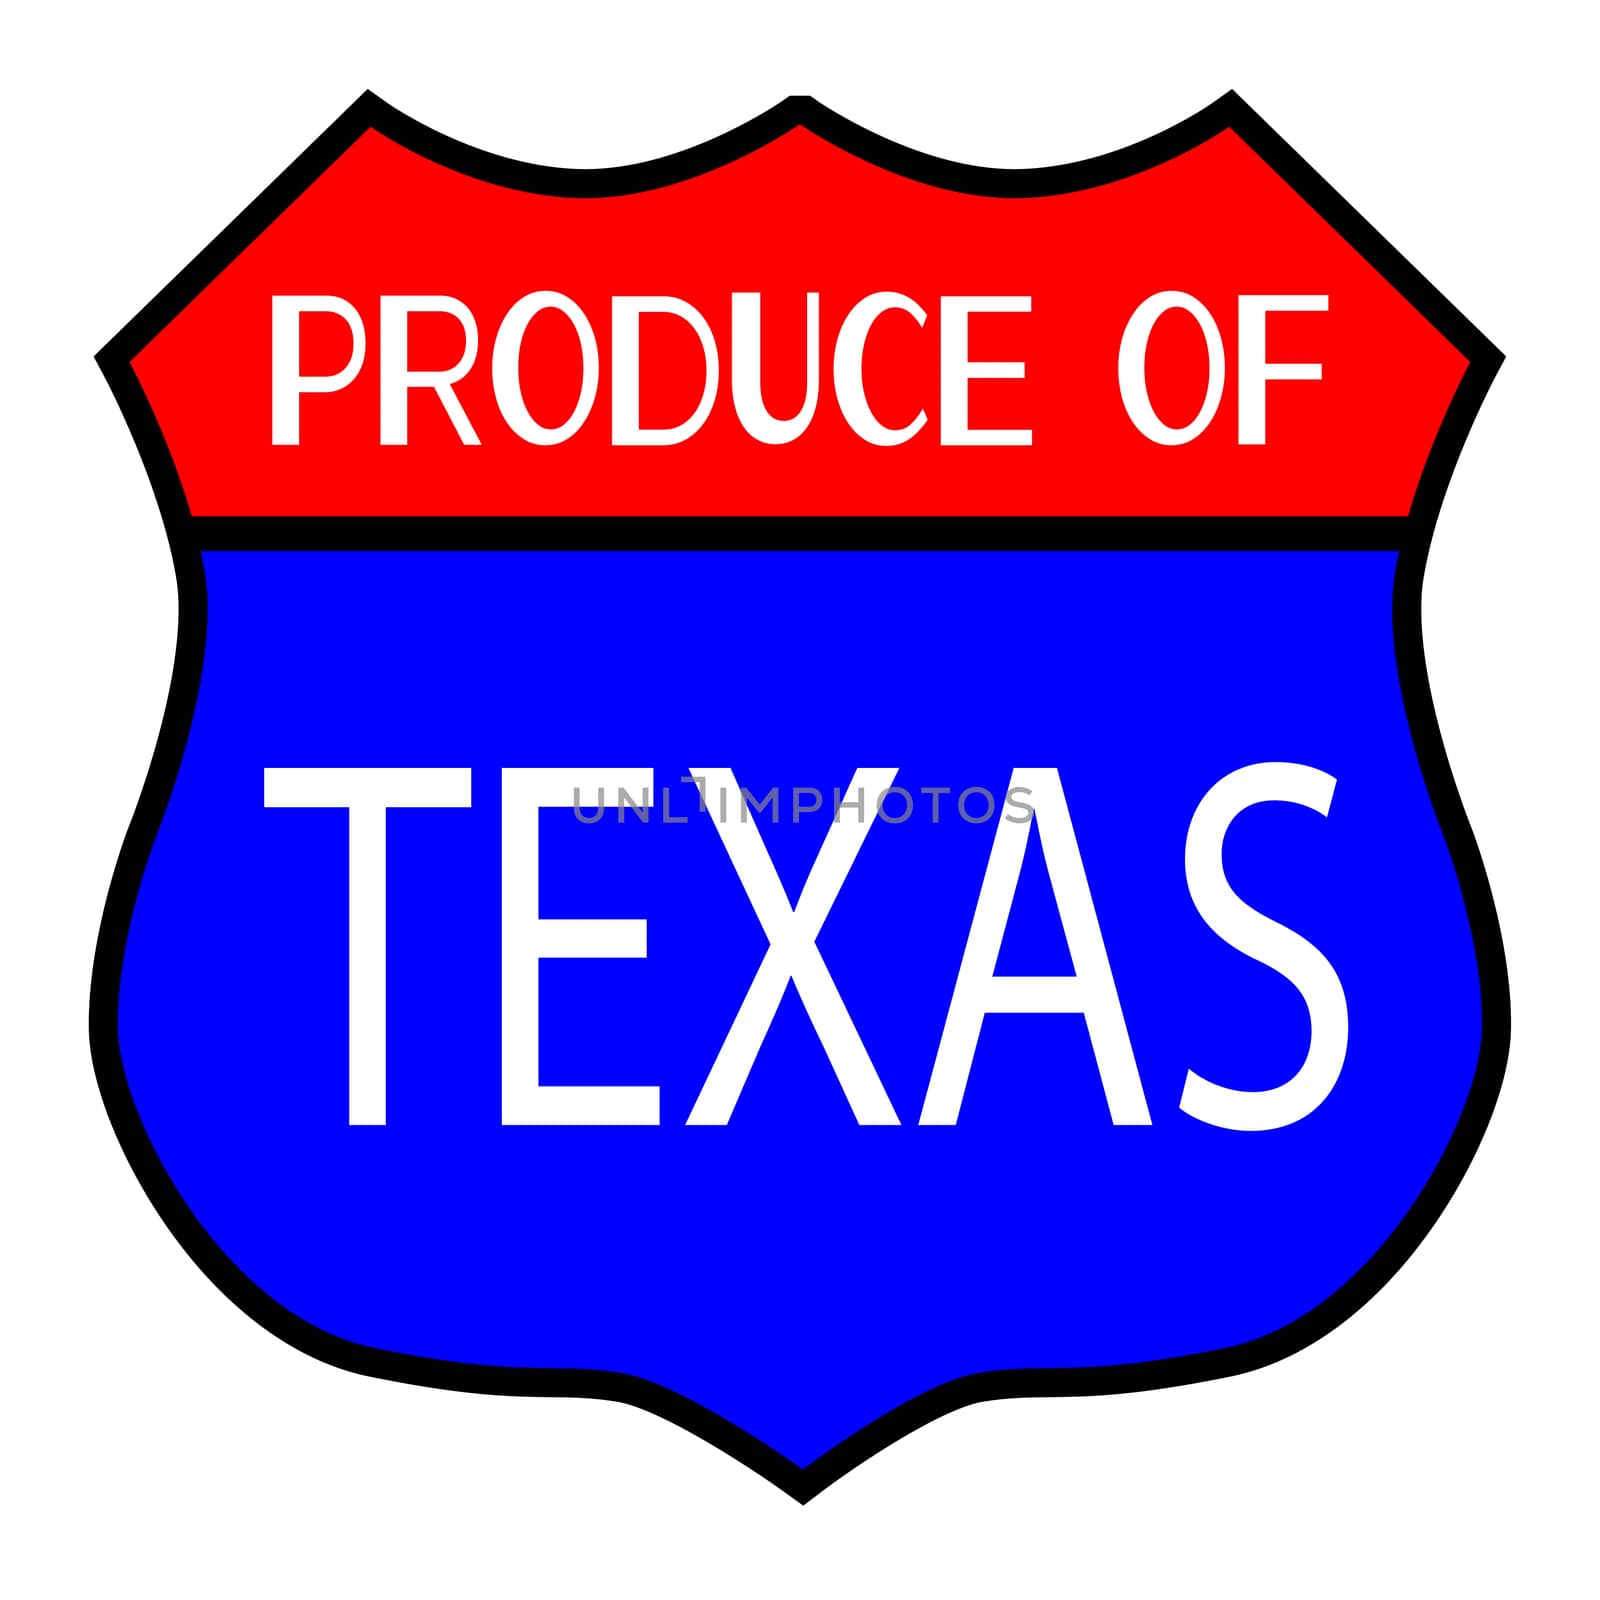 Route 66 style traffic sign with the legend Produce Of Texas